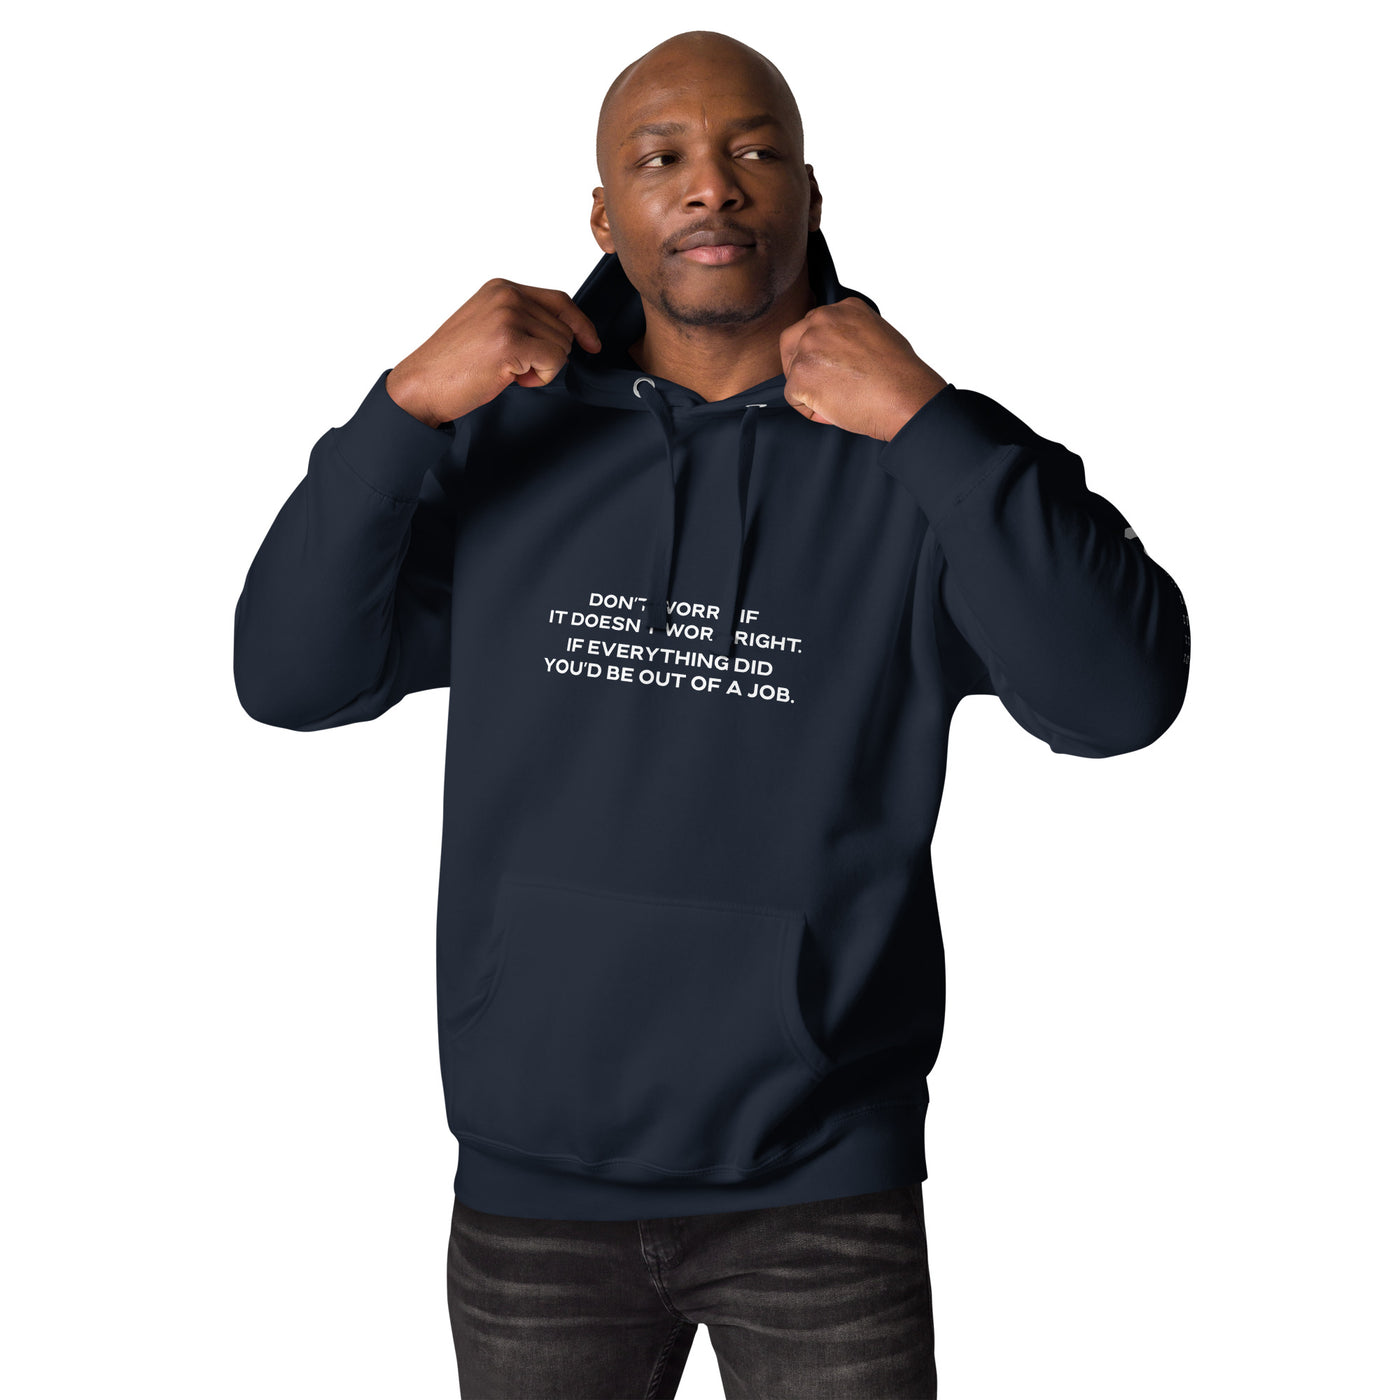 Don't worry if it doesn't work right: if everything did, you would be out of your job V1 - Unisex Hoodie